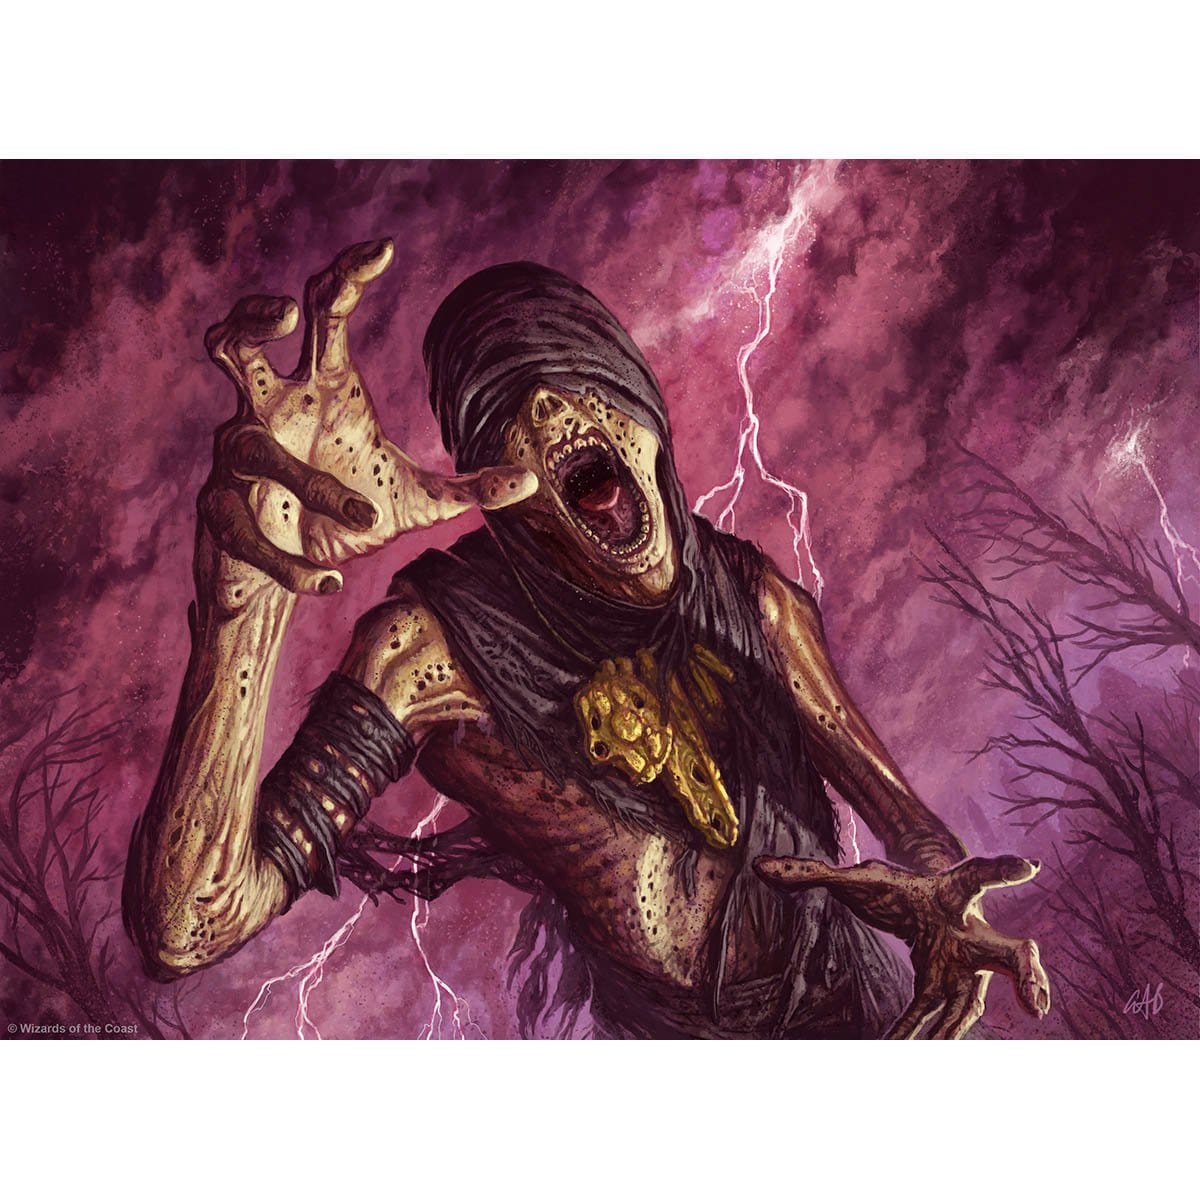 Festering Mummy Print - Print - Original Magic Art - Accessories for Magic the Gathering and other card games